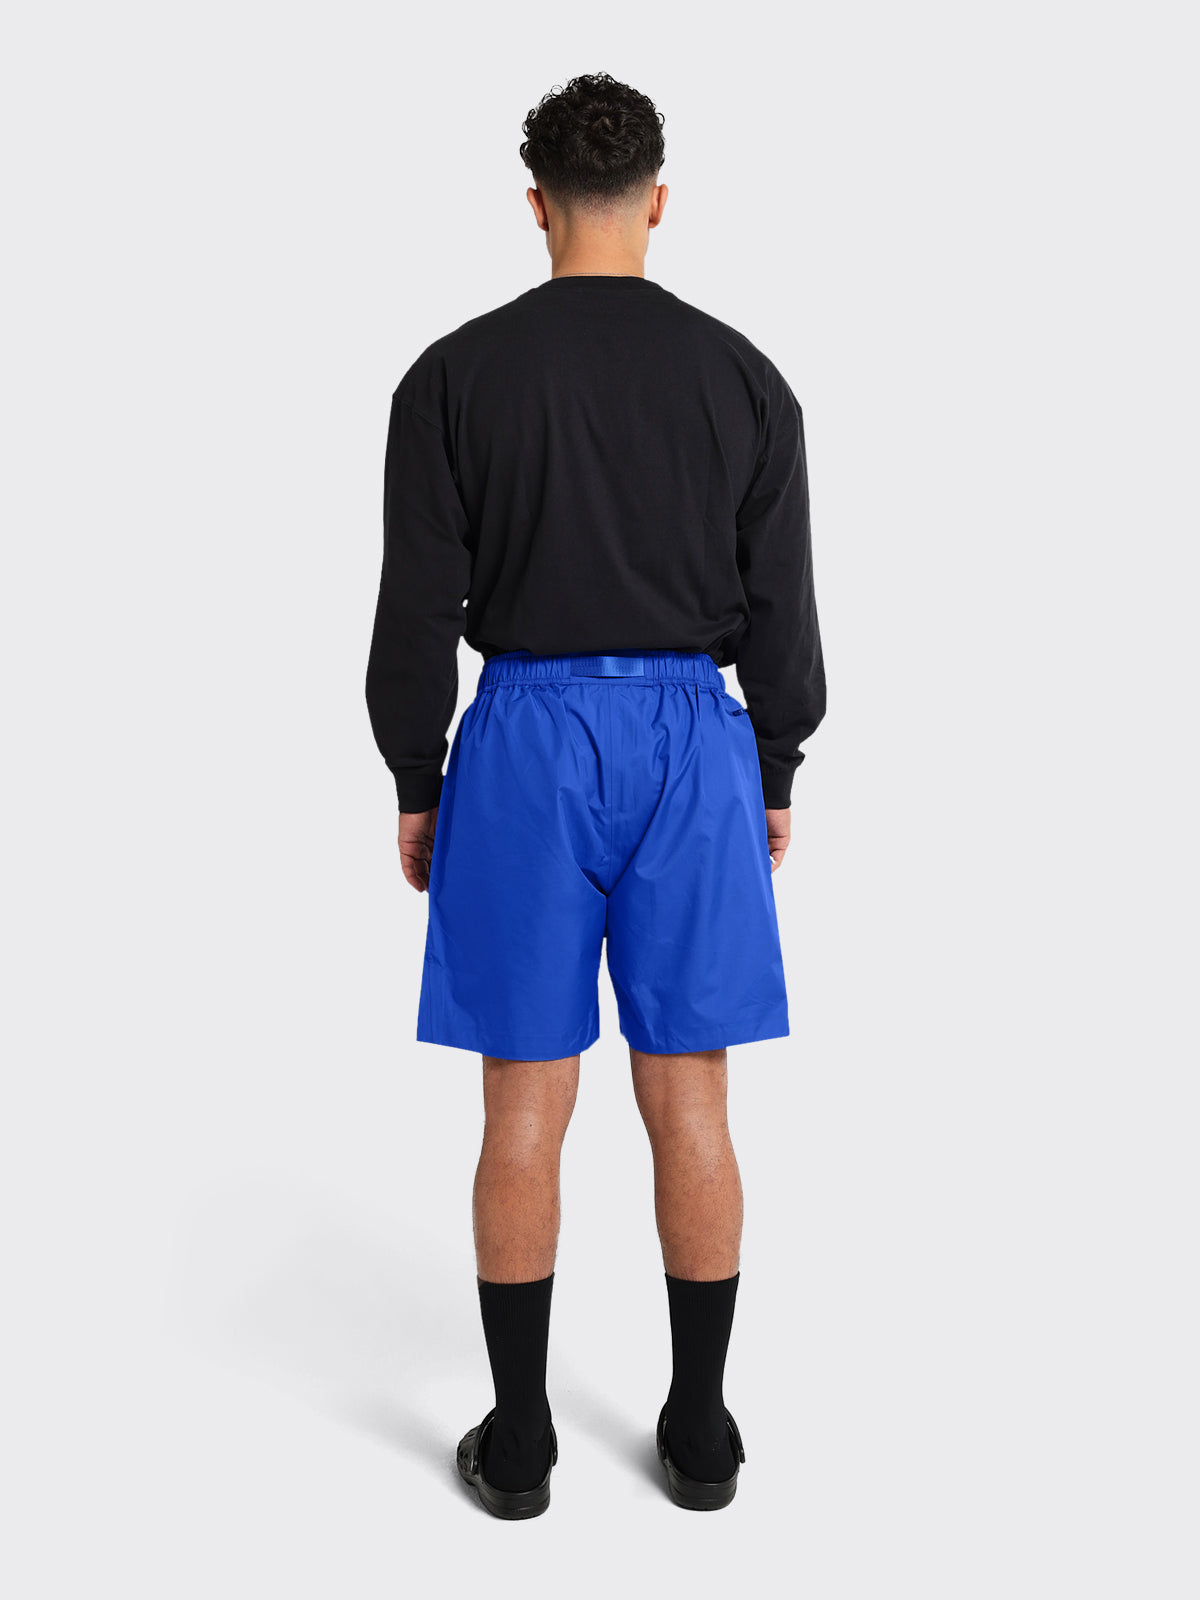 Man wearing Helleren RS shorts from Blæst in Dawn Blue